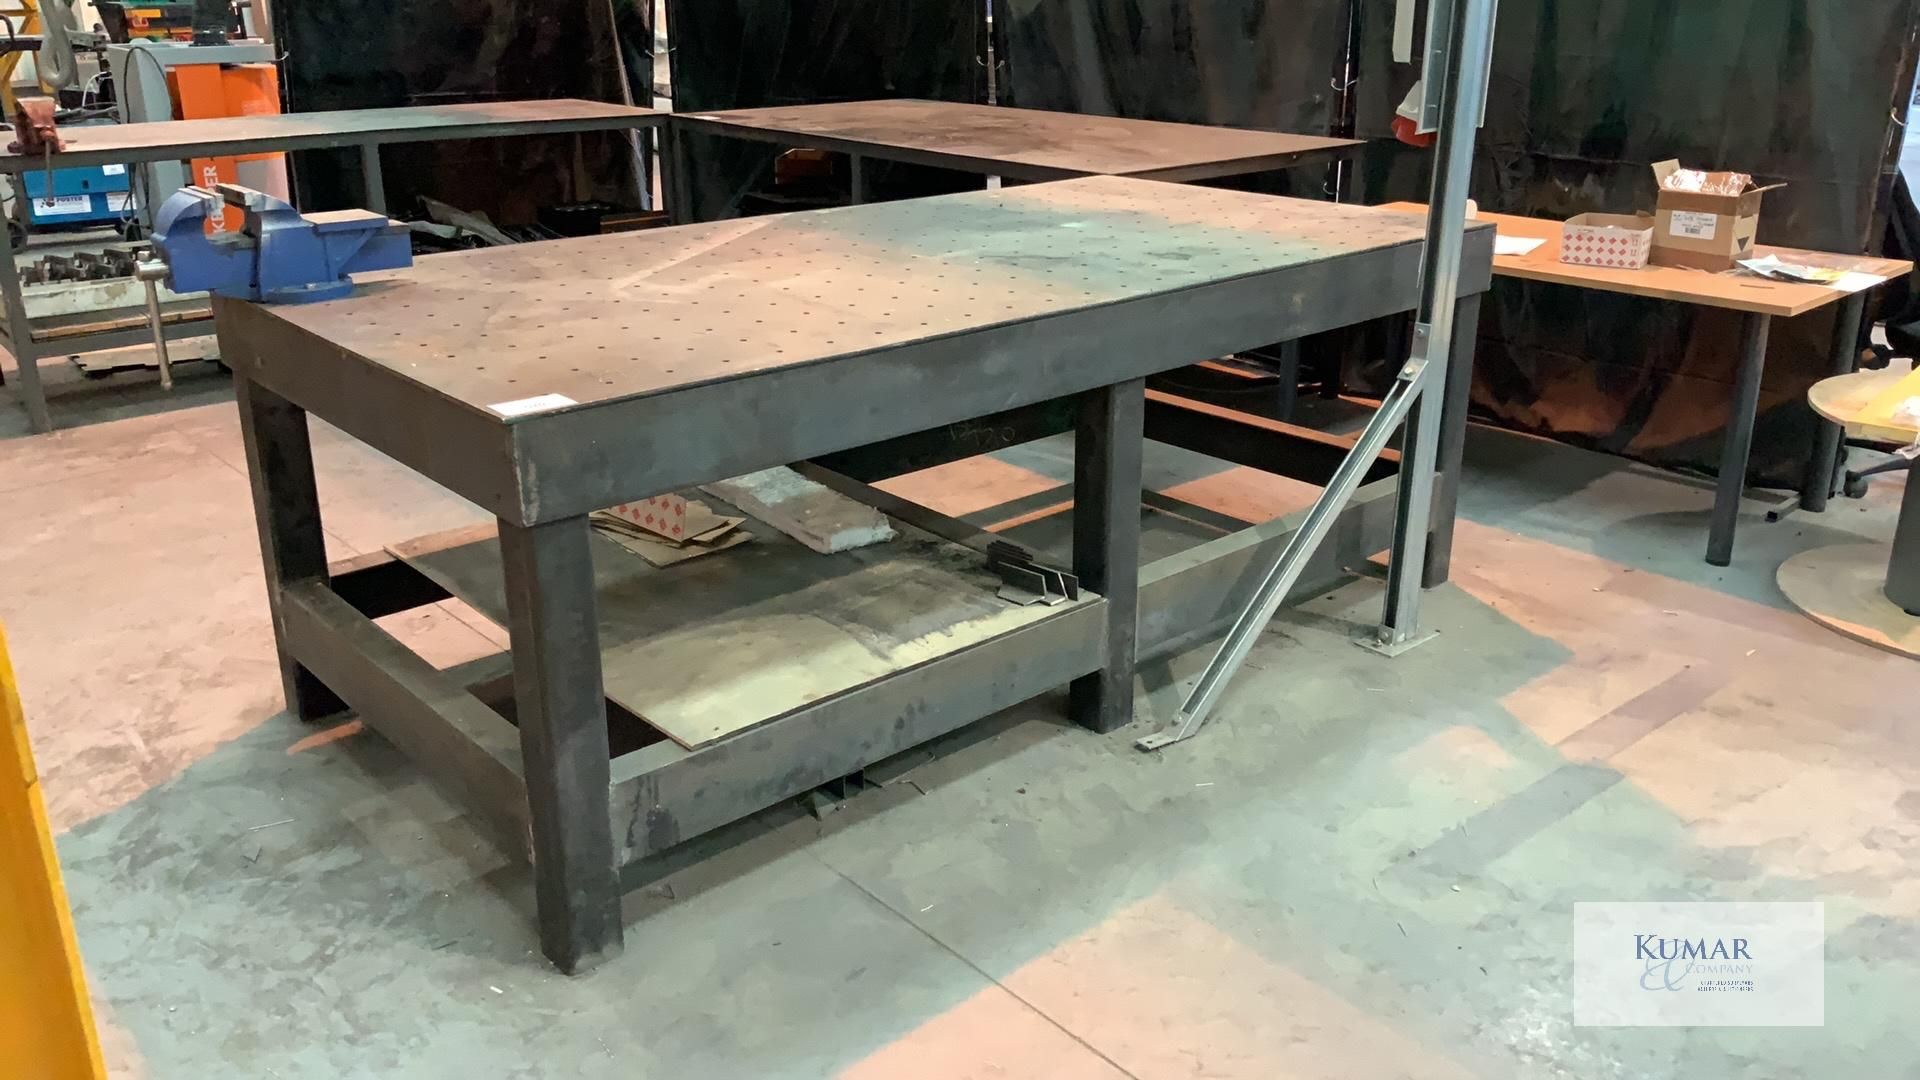 Specialist Welding Table with Bench Vice - Dimensions 250cm x 126cm x90cm Height - Please Note - Image 4 of 7